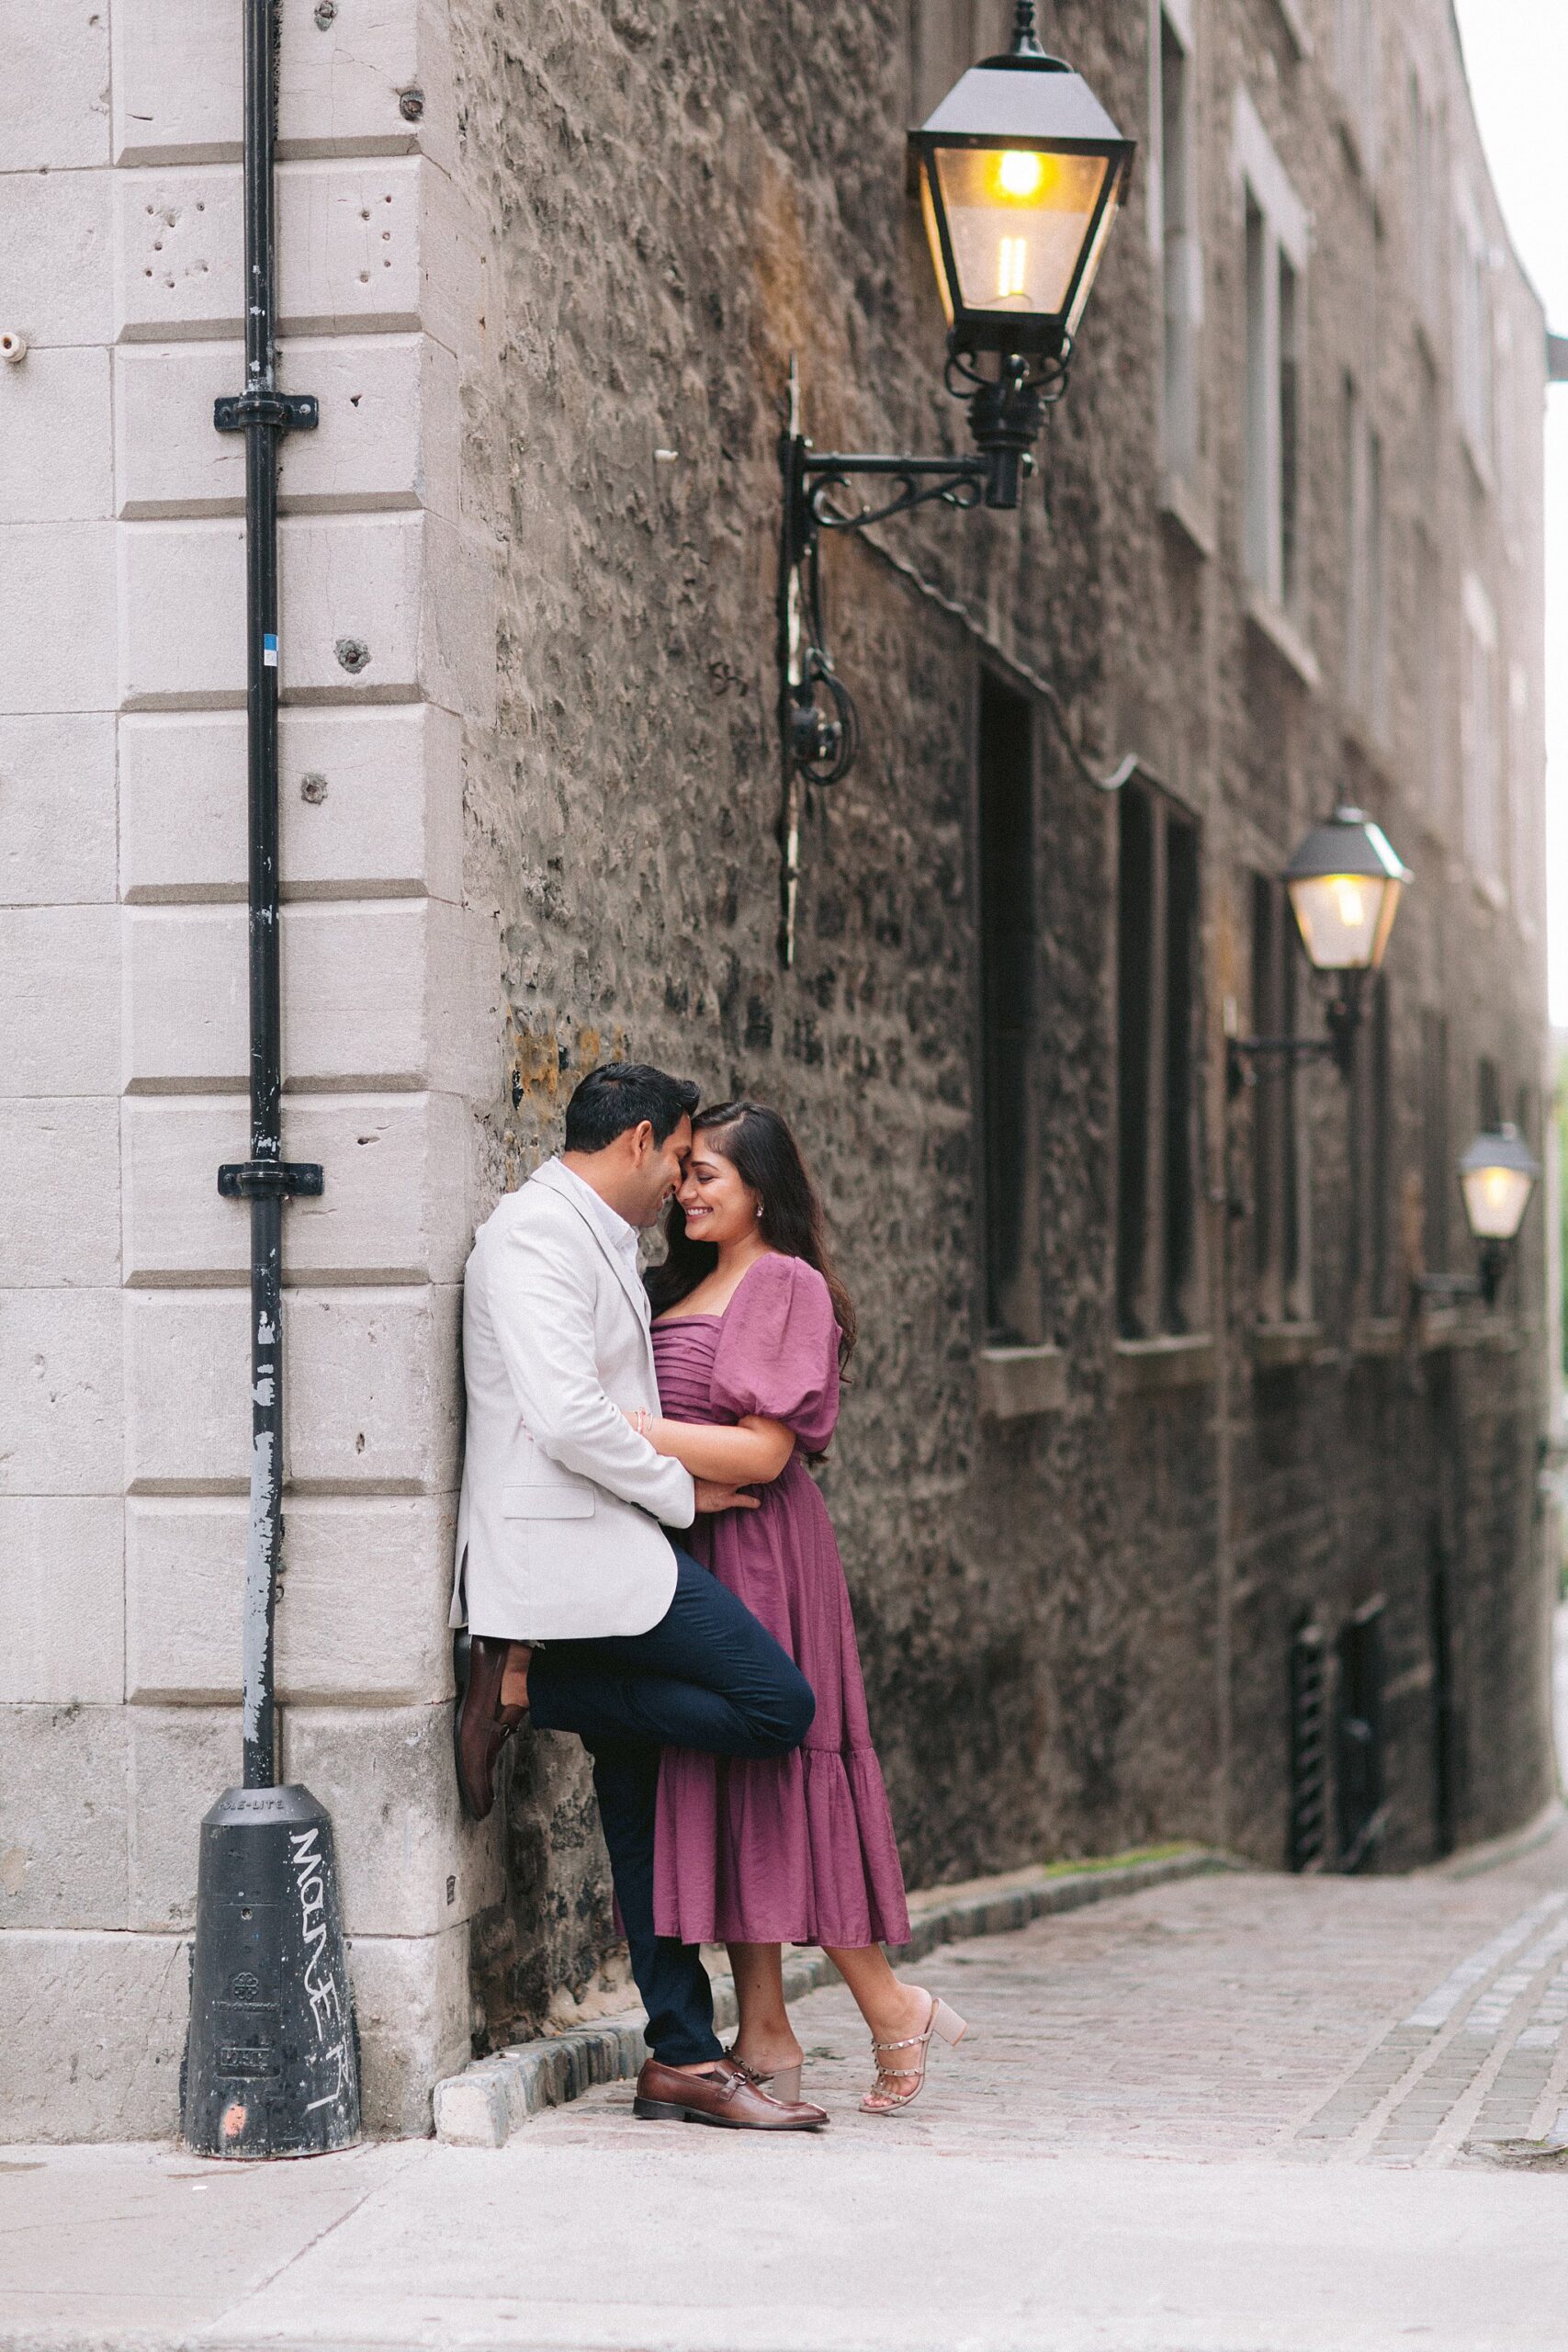 City lights and love: A magical engagement in Montreal